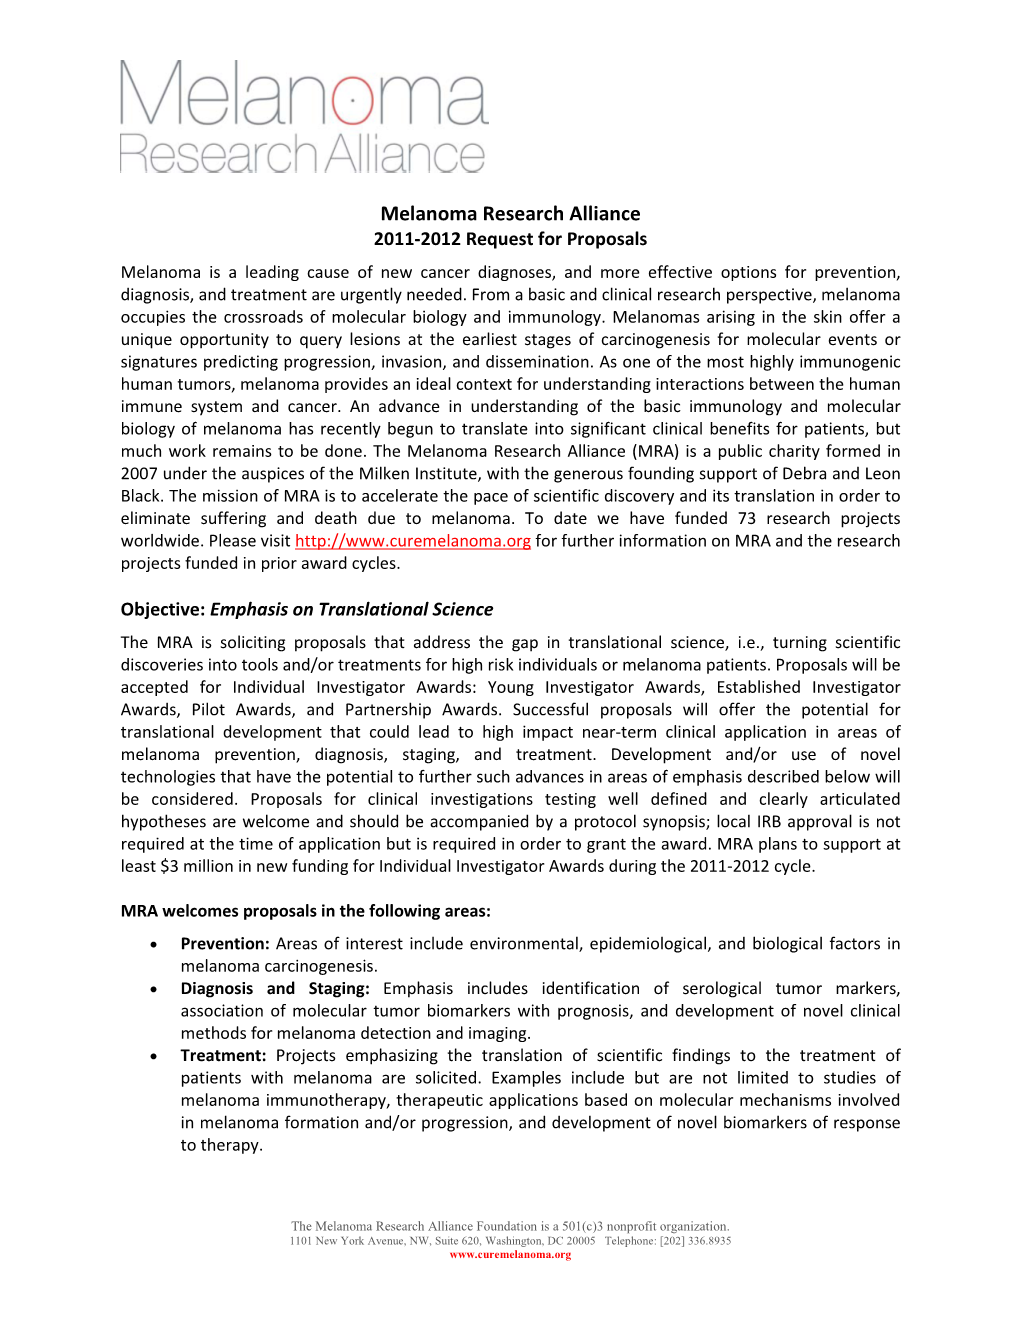 Melanoma Research Alliance 2011-2012 Request for Proposals